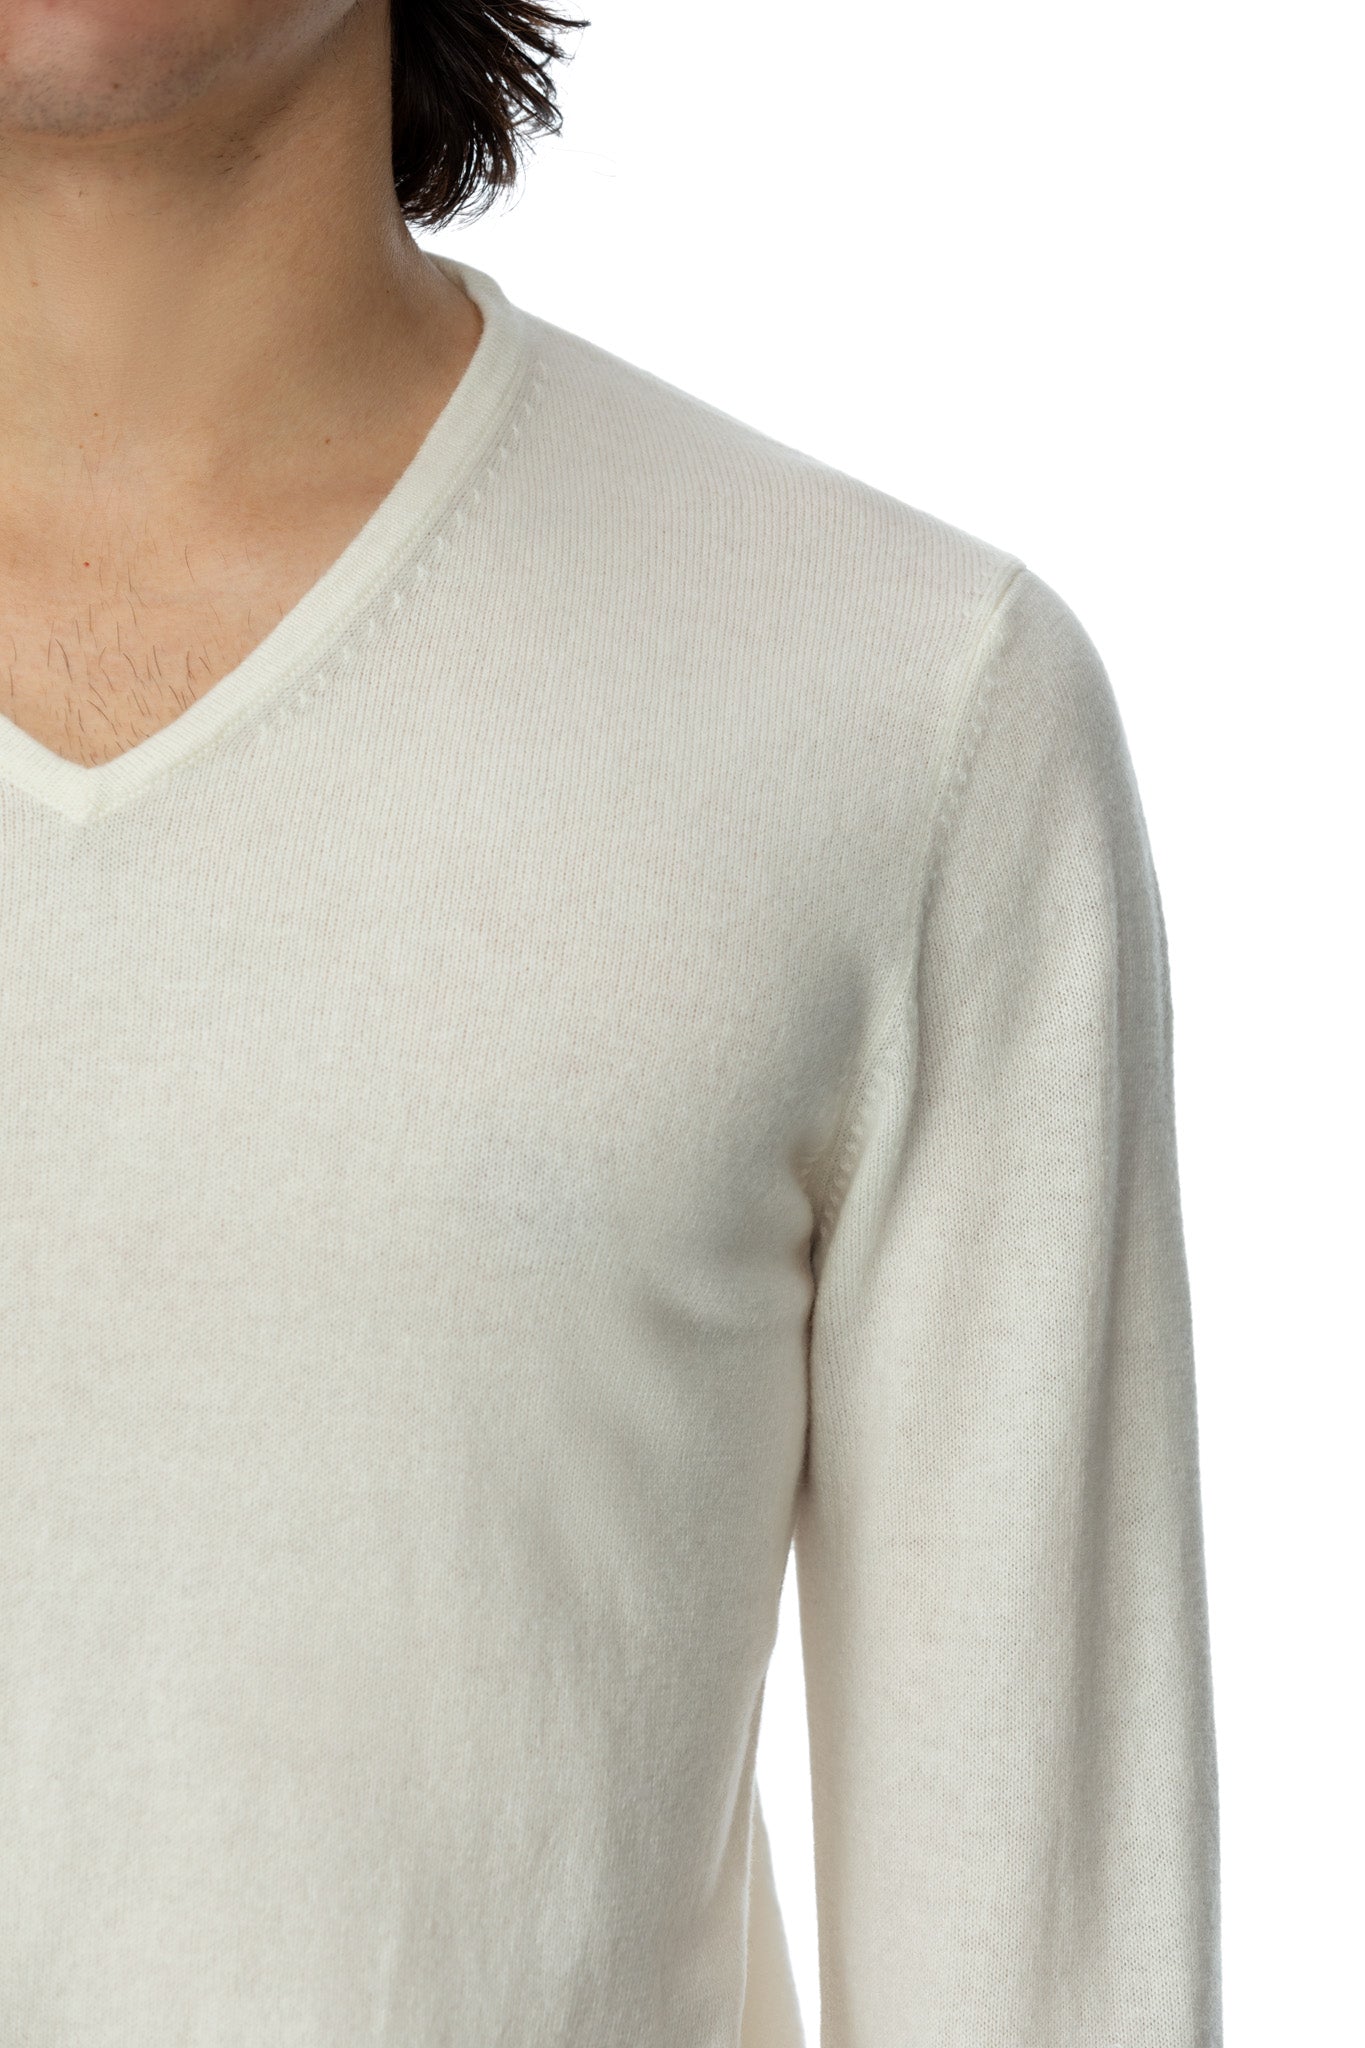 White sweater with V-neck made of merino wool and cashmere